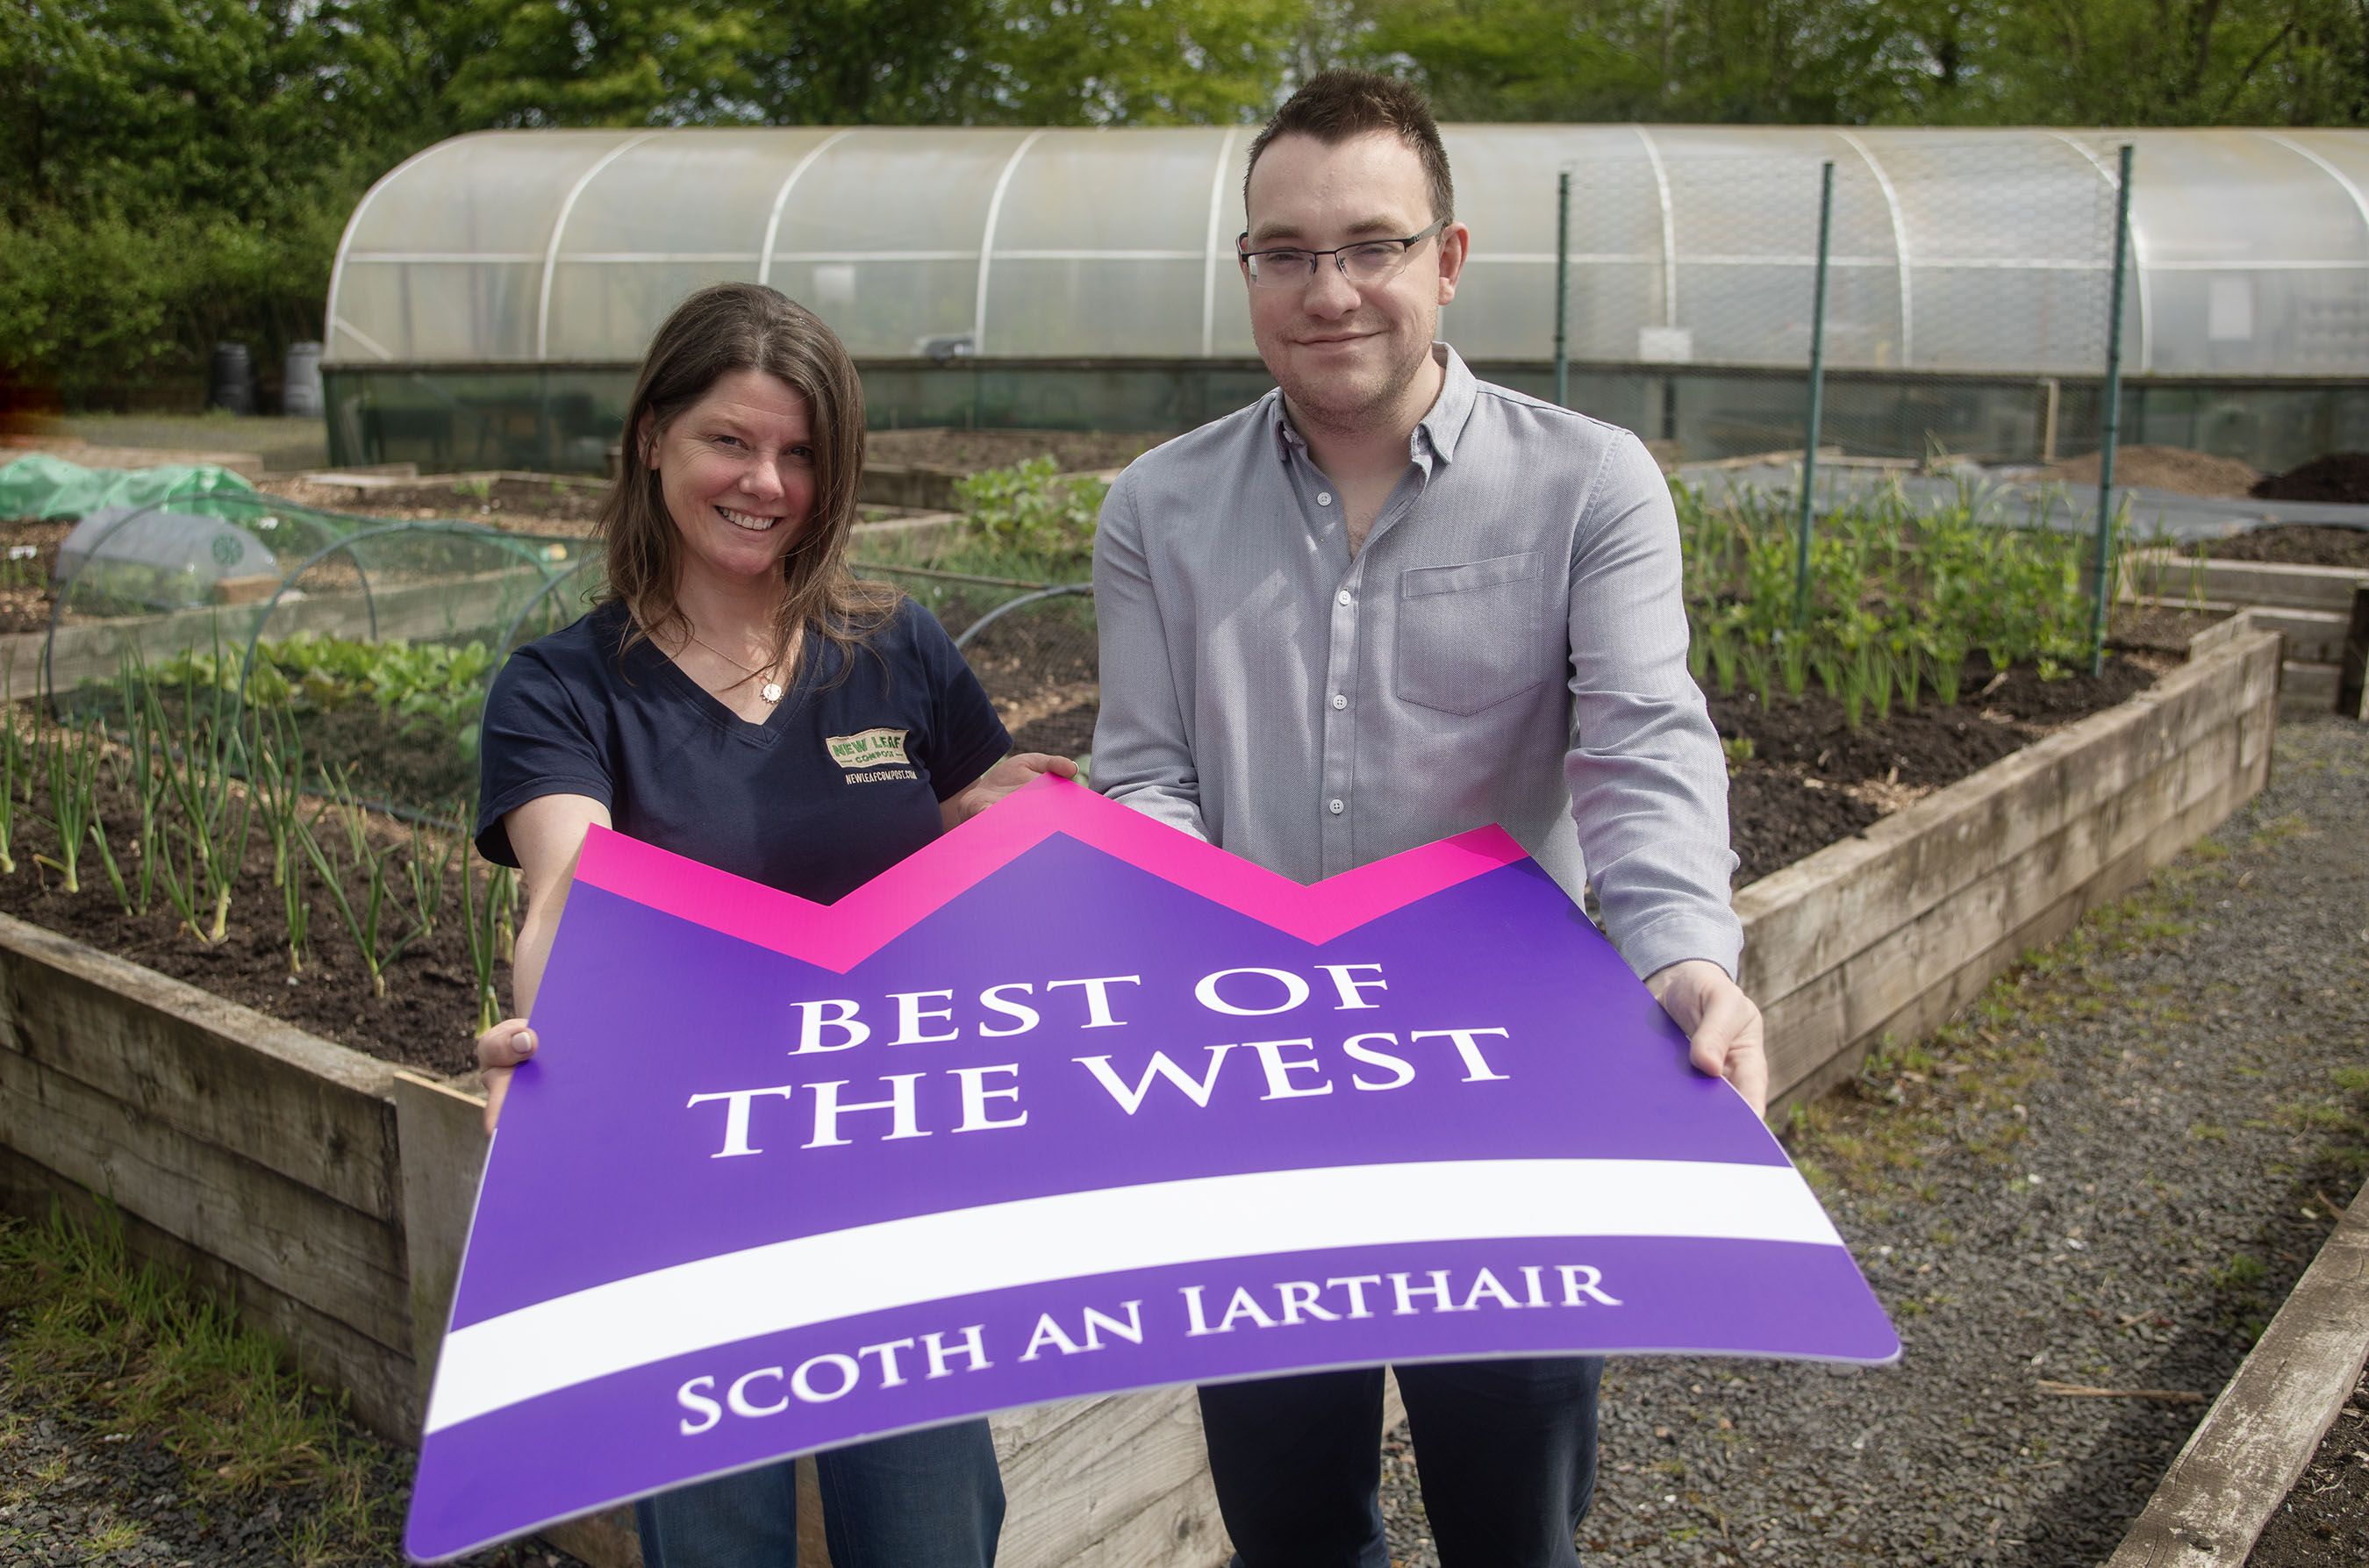 BEST OF THE WEST: Sharon McMaster, Community Outreach Manager for Natural World Products, with Conor McParland from Belfast Media at Colin Allotments